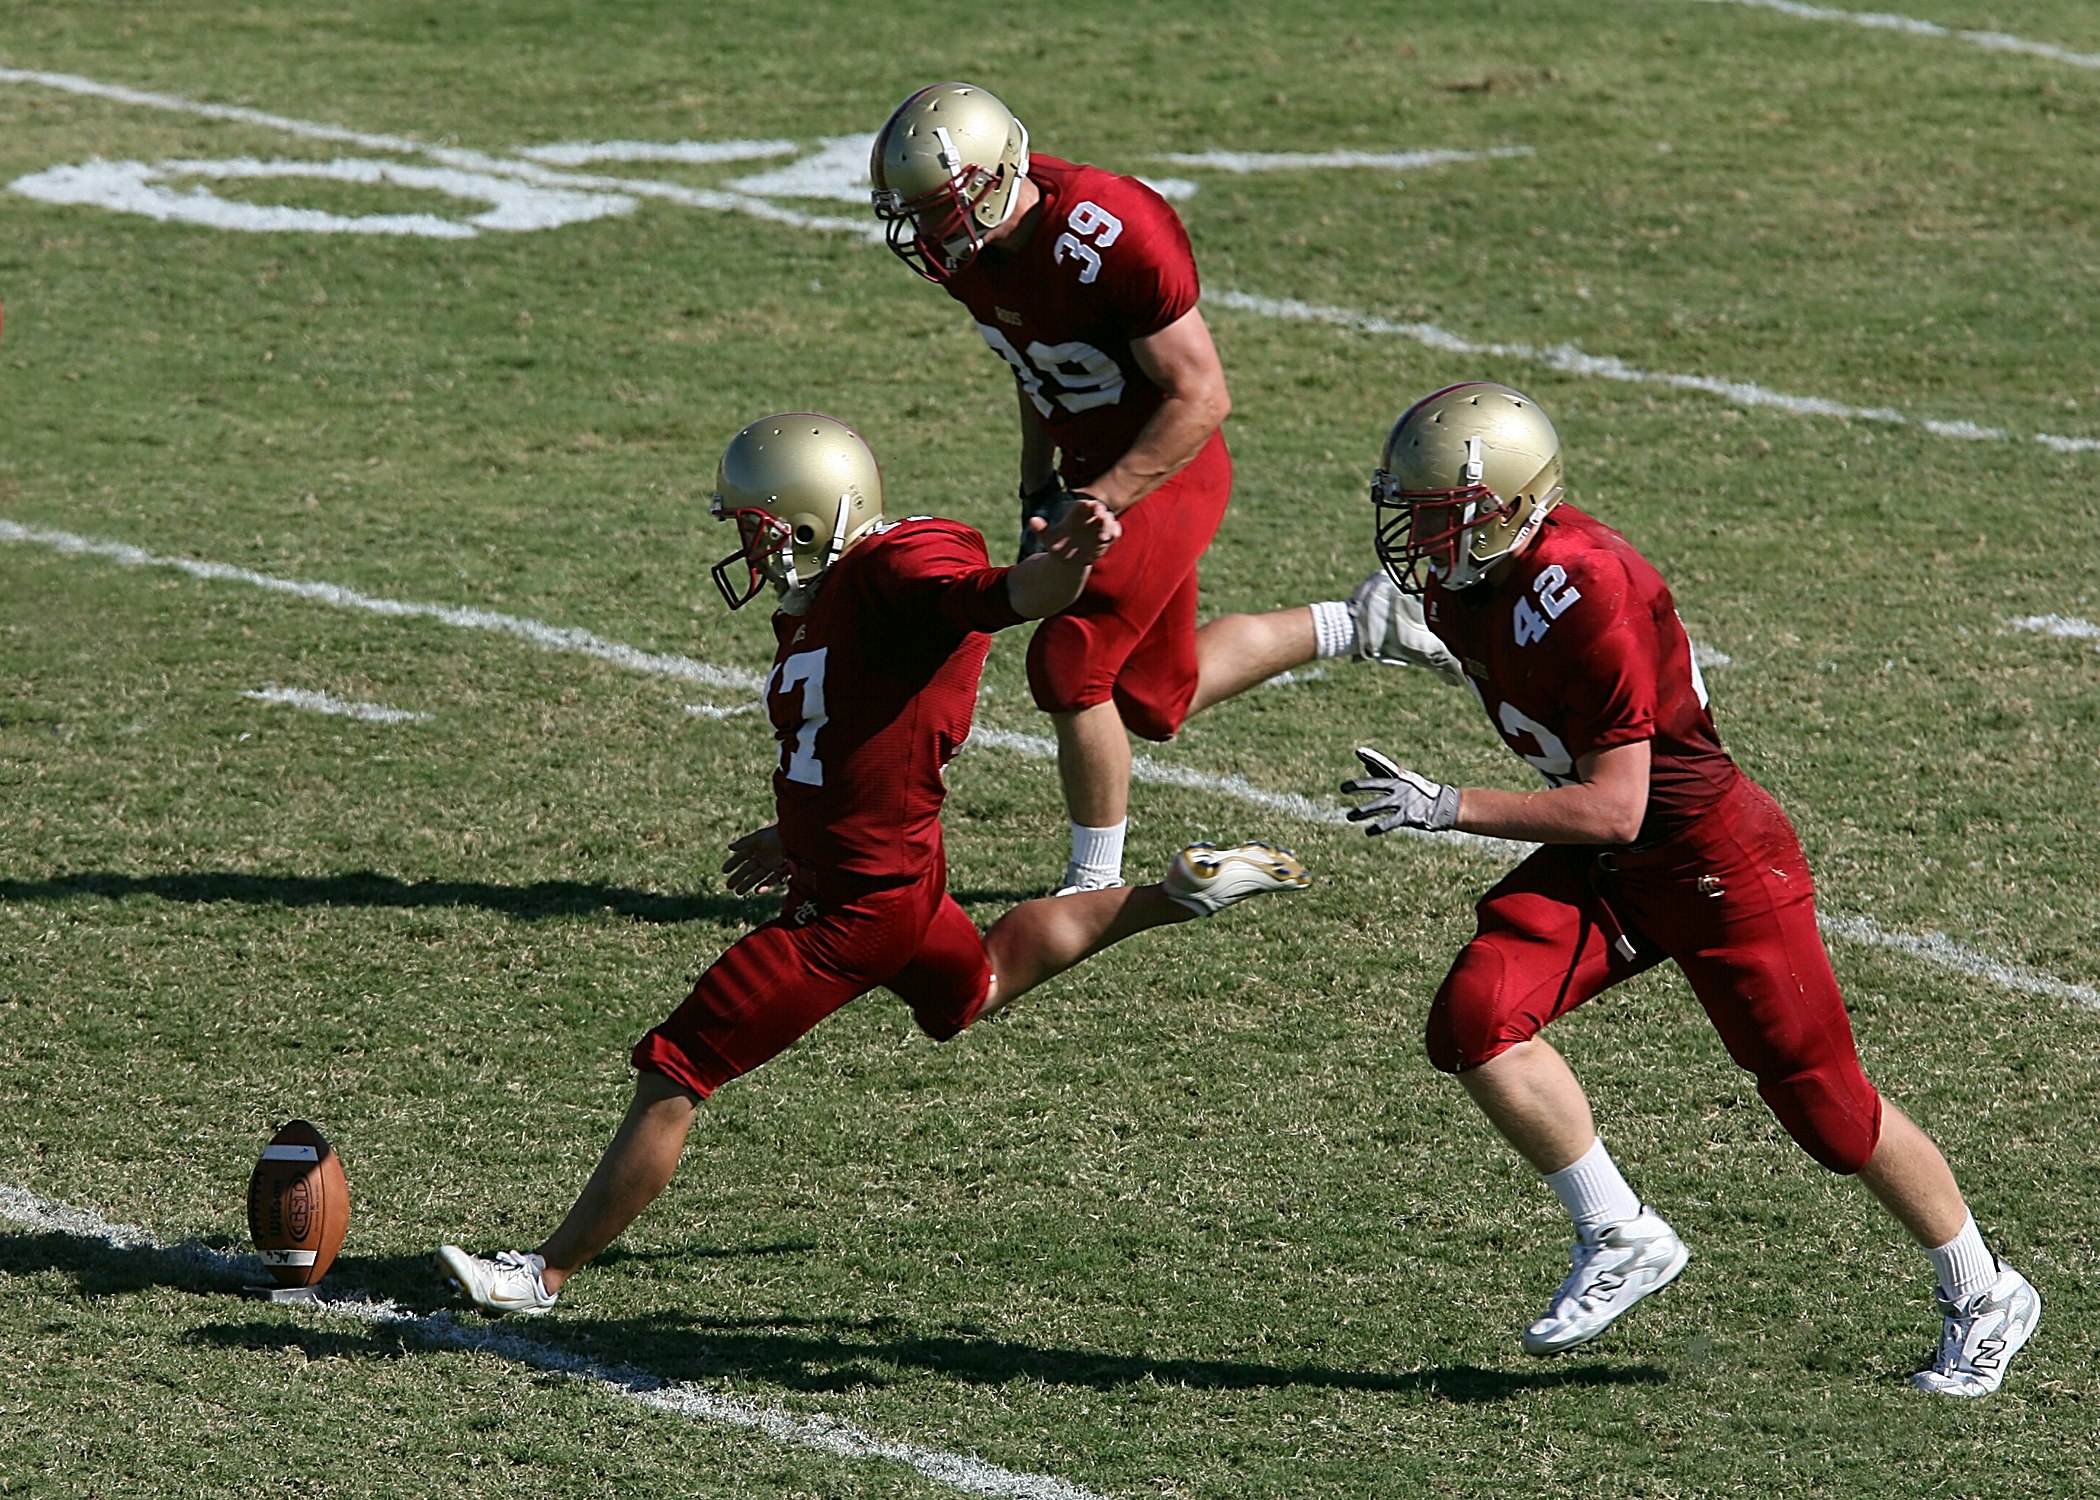 College player prepares to kick the ball to start the game.  His teammates prepare to accompany him downfield.